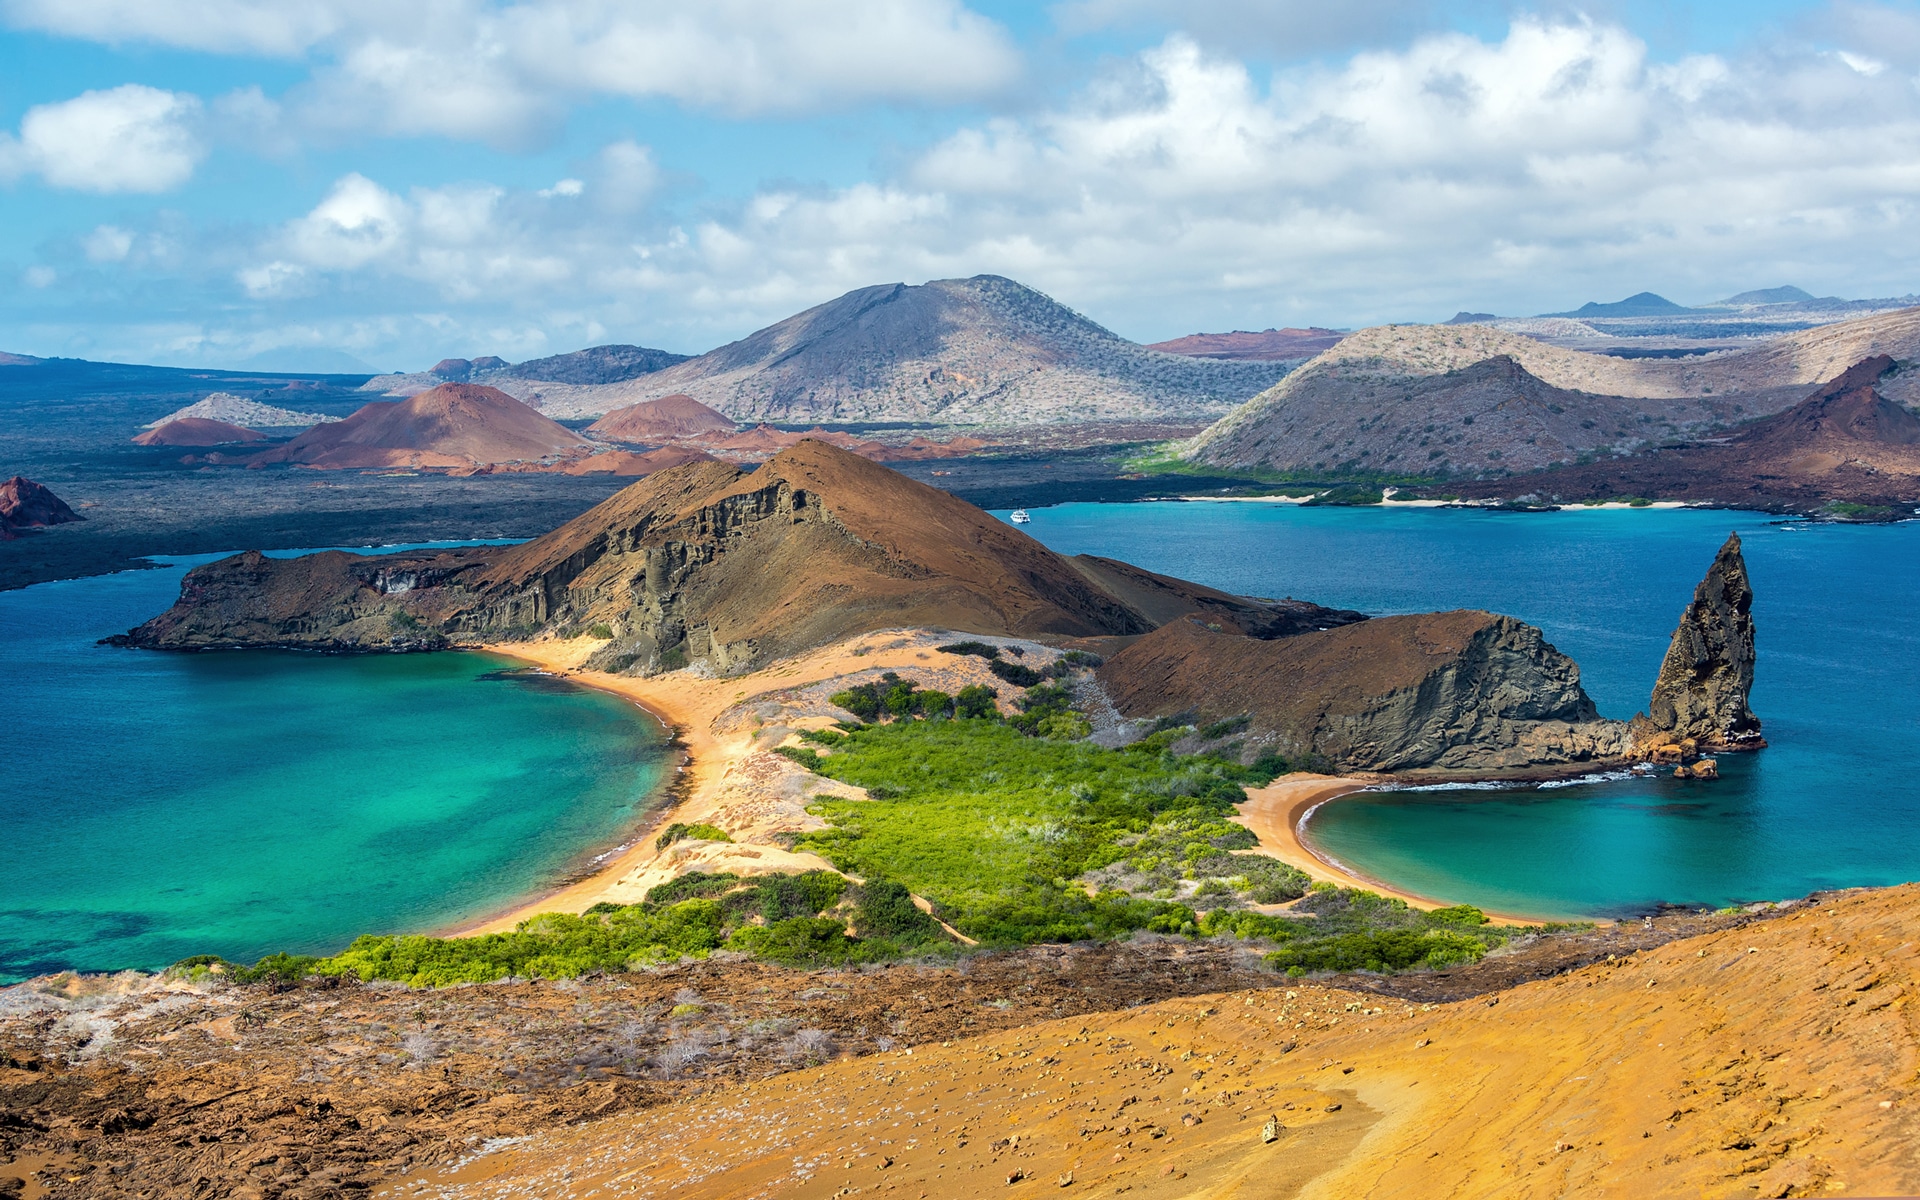 galapagos islands travel restrictions